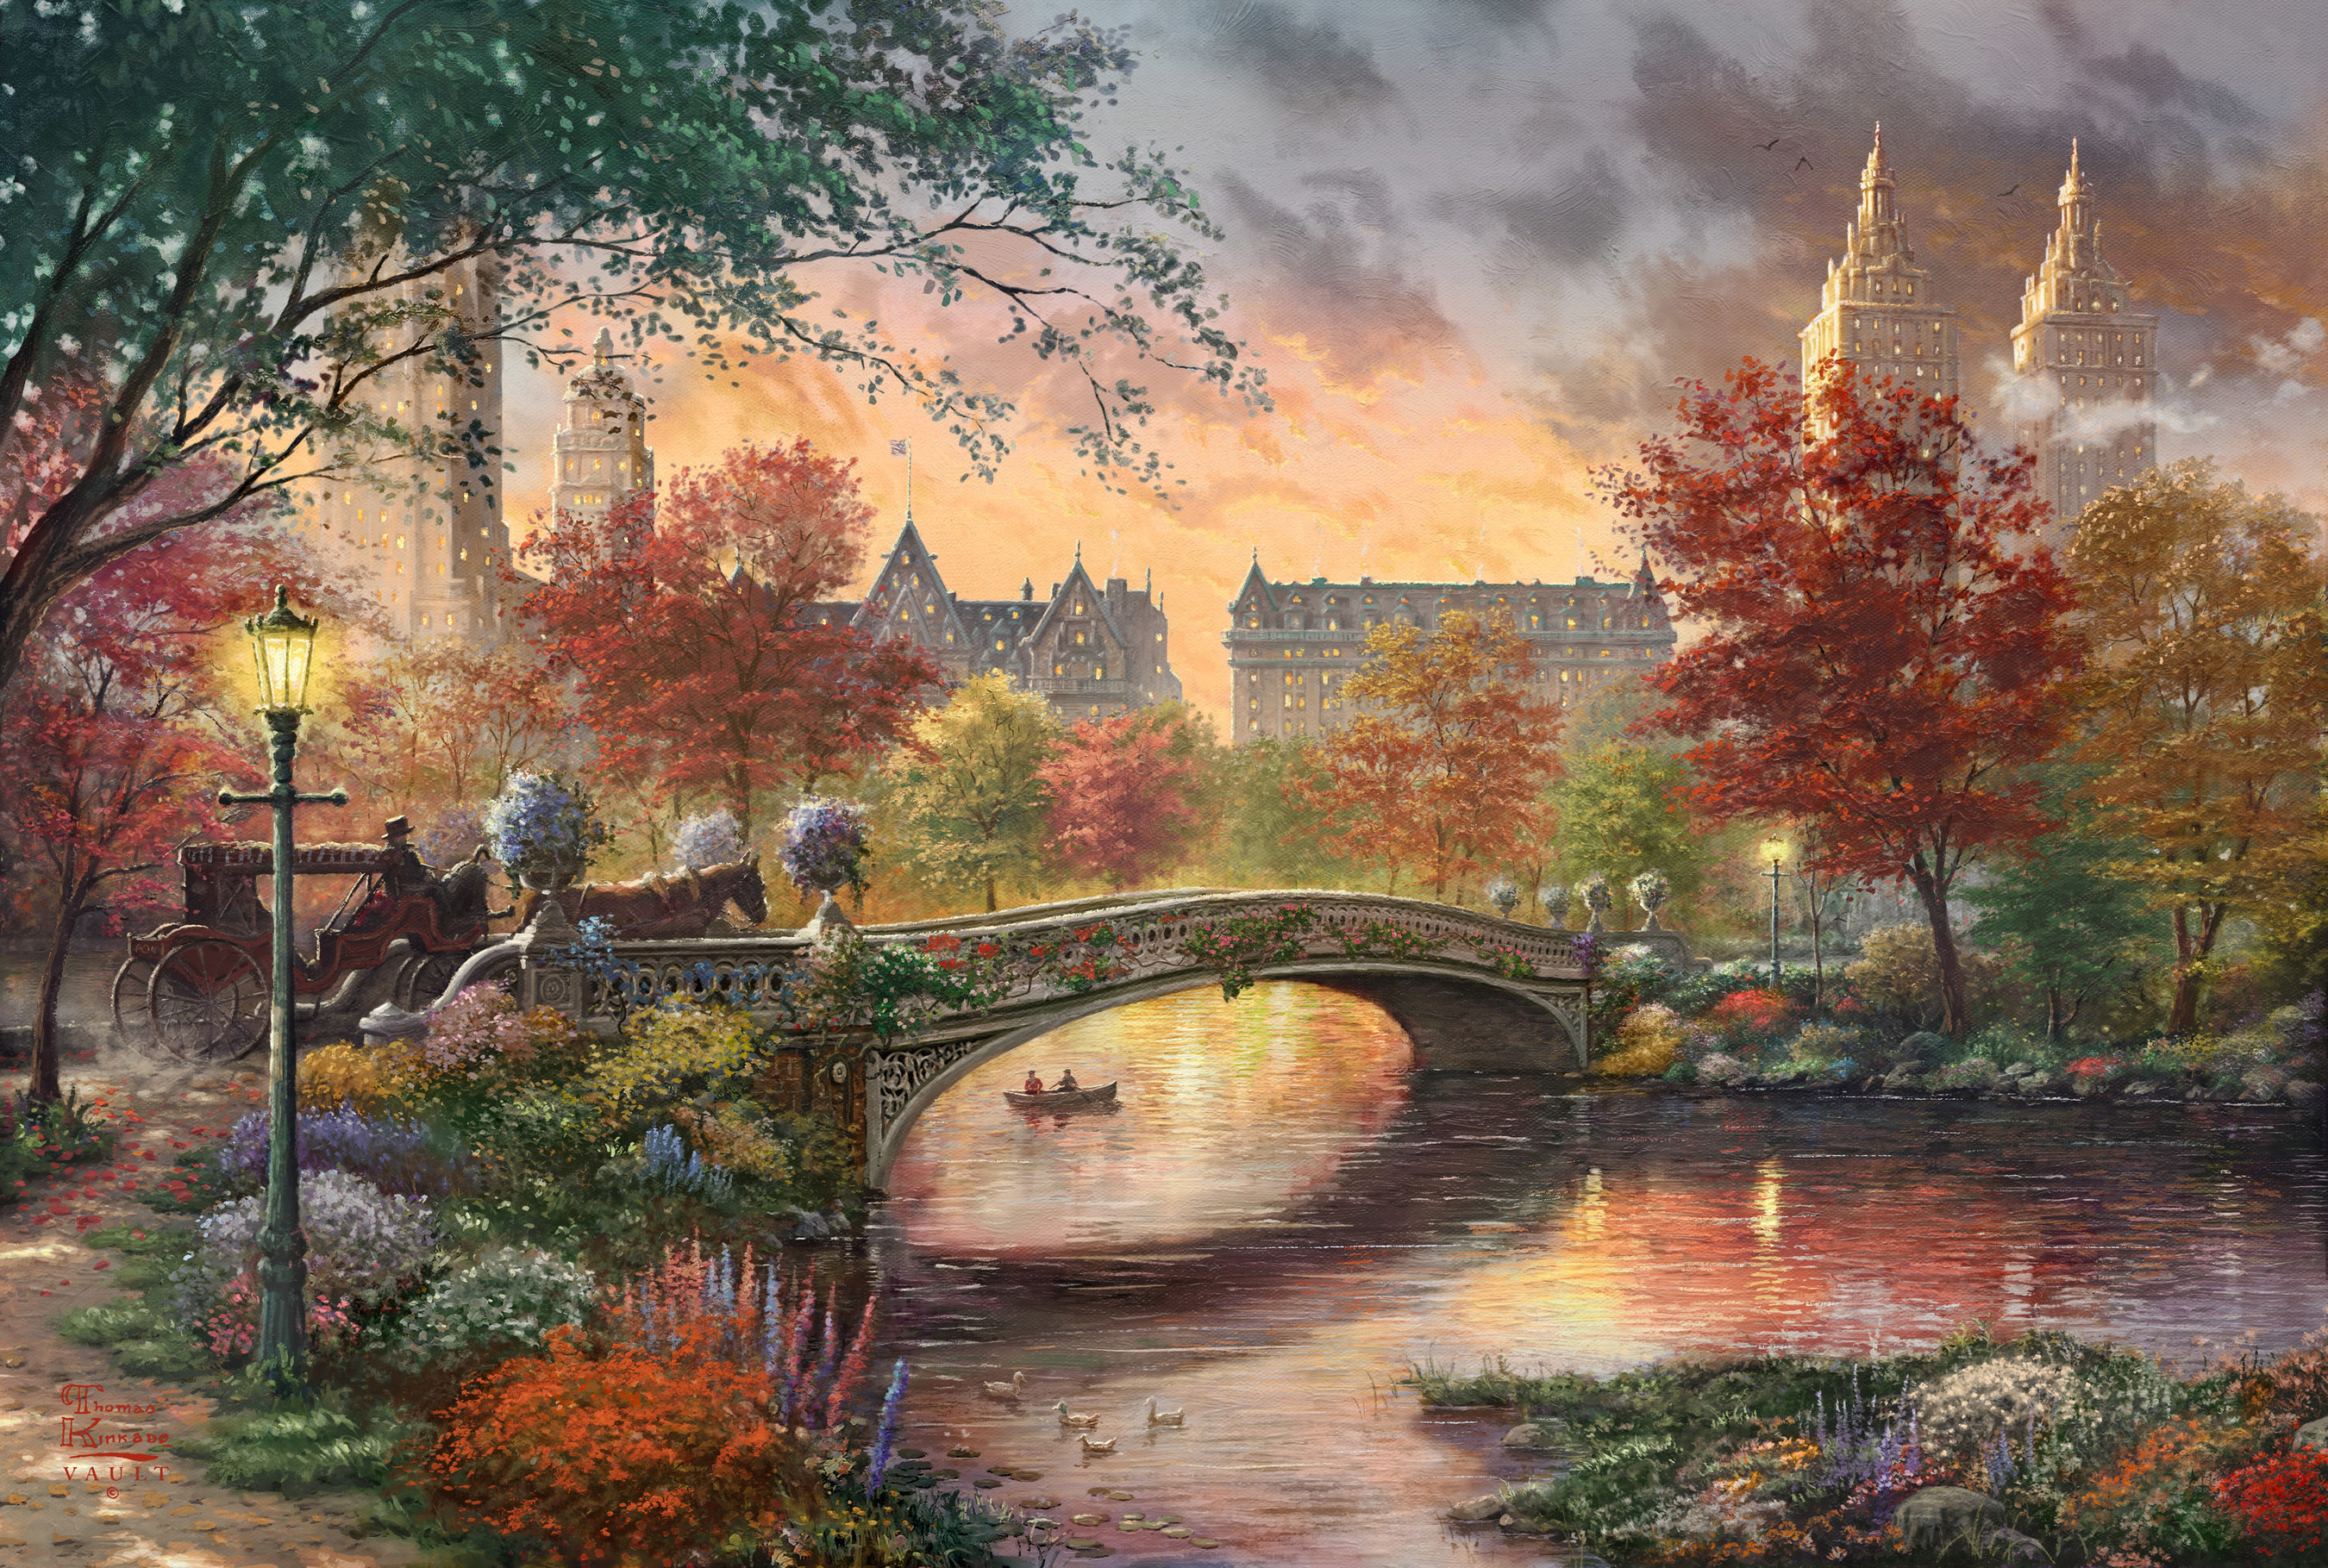 PTM Images(R), a leading manufacturer of home decor and furnishings, announced today that it has entered into a license agreement with Art Brand Studios, LLC, the authorized licensor of renowned American Artist Thomas Kinkade, to design, manufacture and market an extensive home decor collection based on his artwork. "We are proud of this beautiful collaboration with Thomas Kinkade, one of the most admired American Artists", said Jonathan Bass, CEO of  PTM Images. "Together we will create a unique collection that will express the wonder and light of Thomas Kinkade."